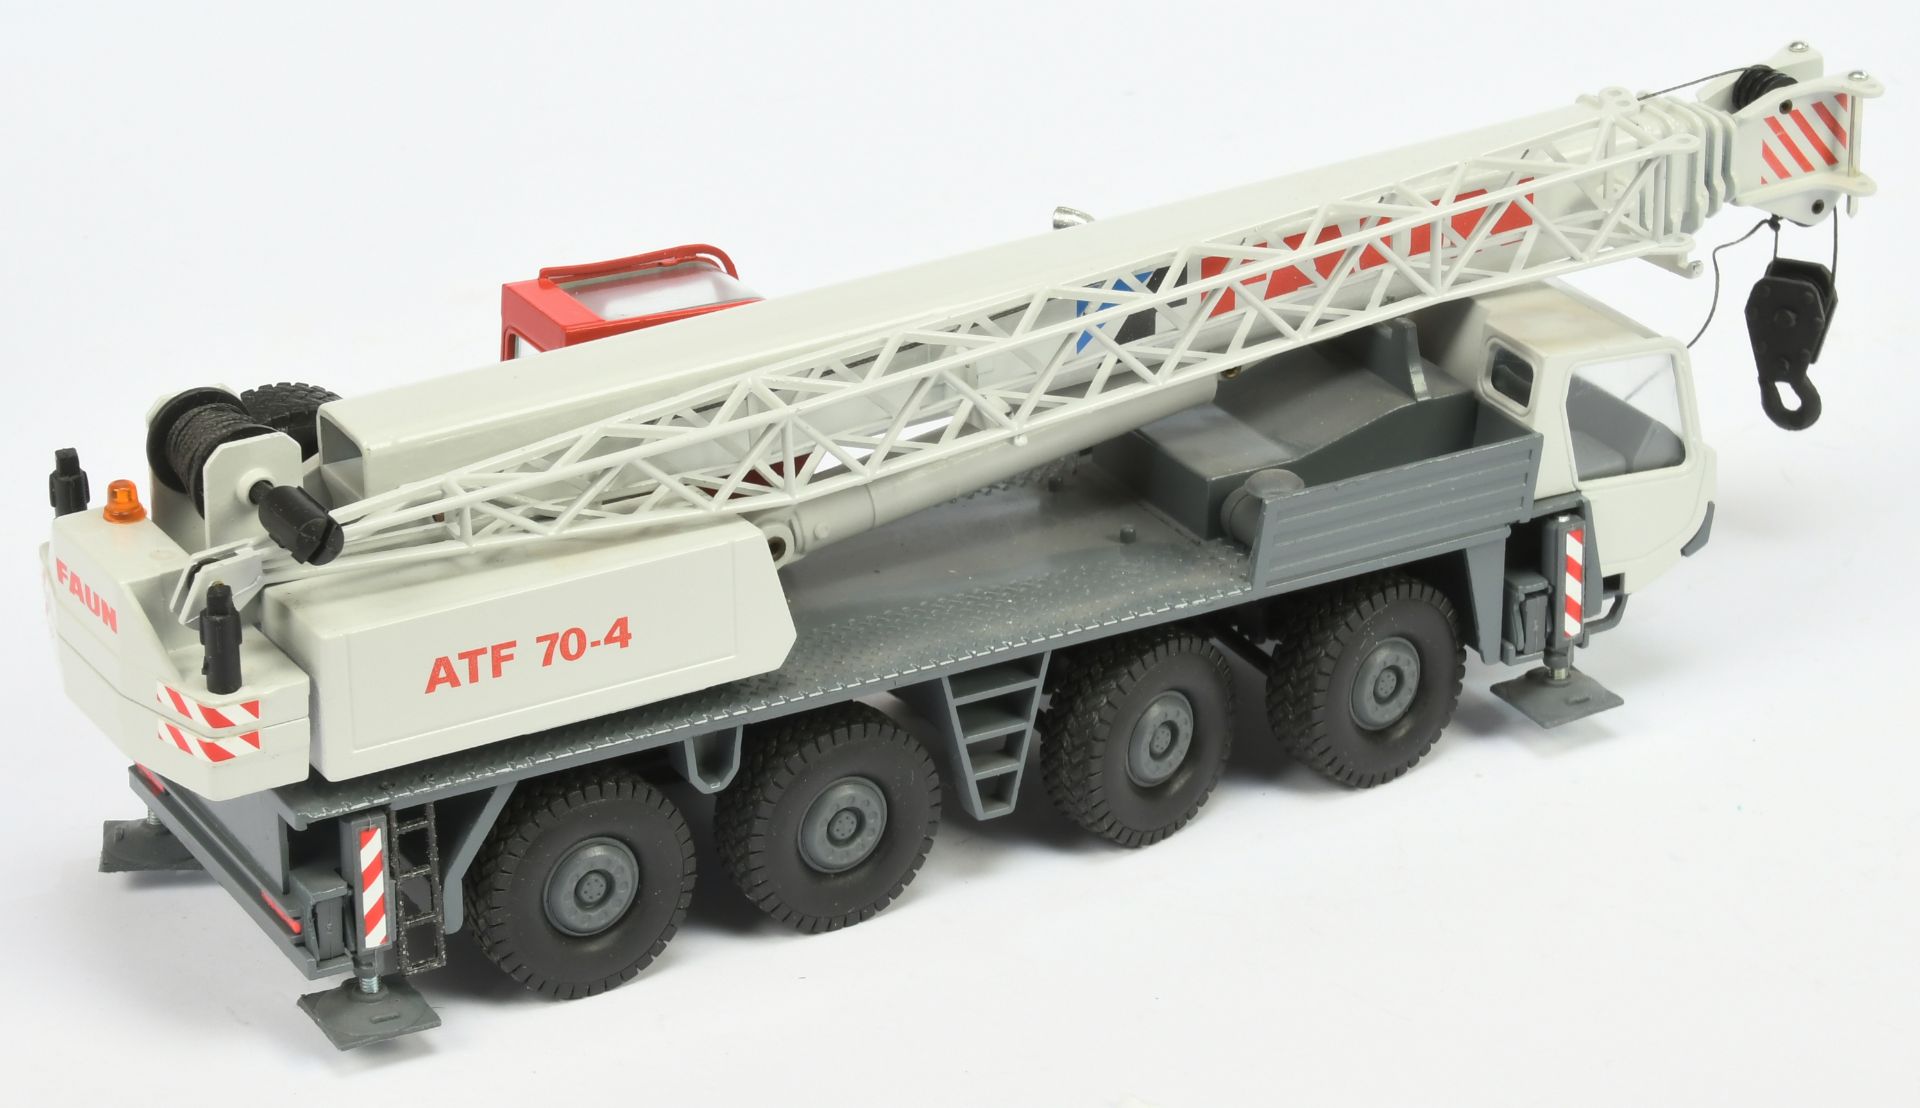 Conrad Models (1/50th) 2004 Faun ATF 70.4 Mobile Crane - Two-Tone grey, red - Excellent (not chec... - Image 2 of 2